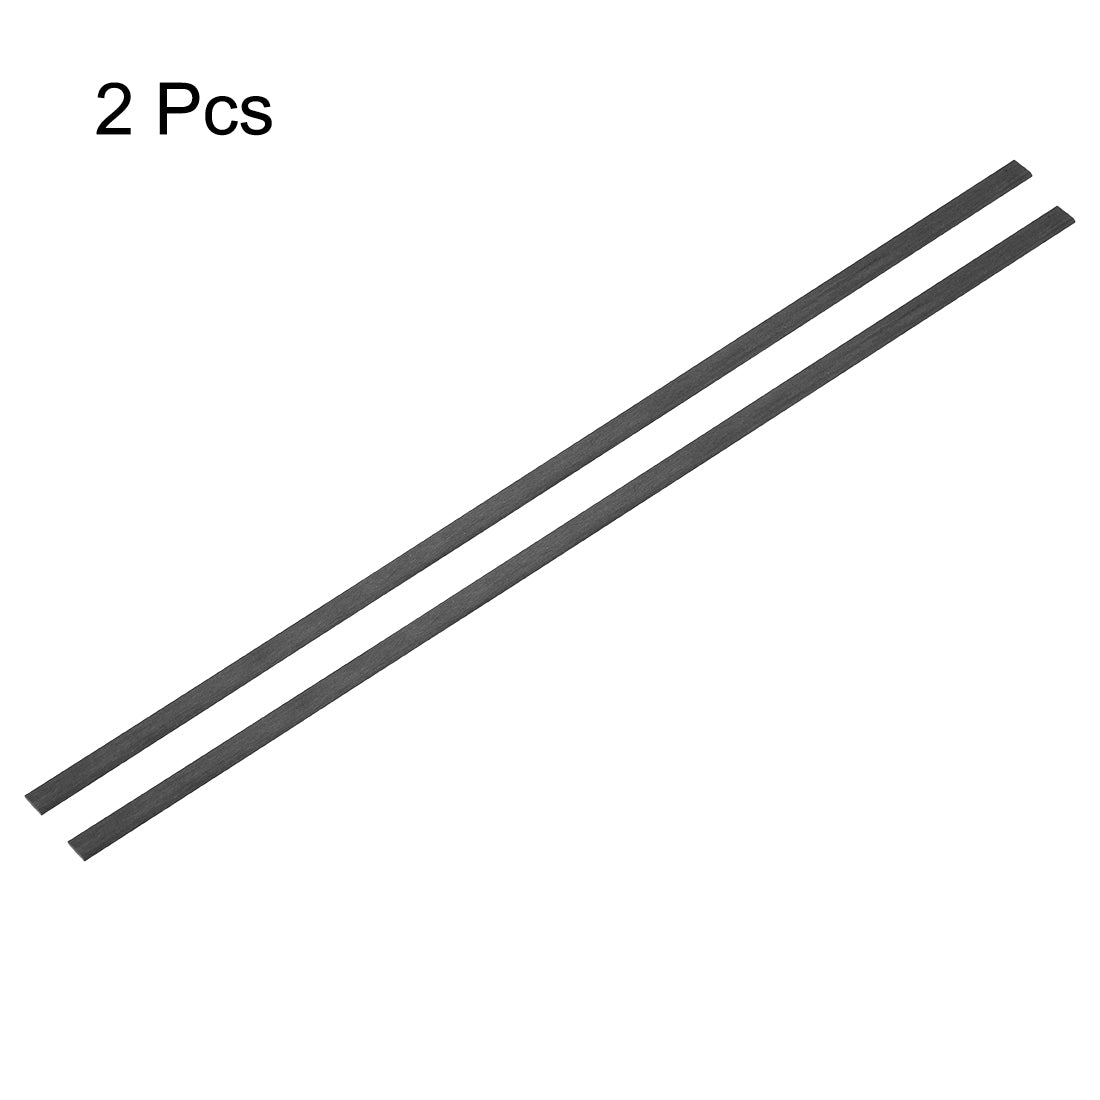 uxcell Uxcell Carbon Fiber Strip Bars 1x5mm 400mm Length Pultruded Carbon Fiber Strips for Kites, RC Airplane 2 Pcs